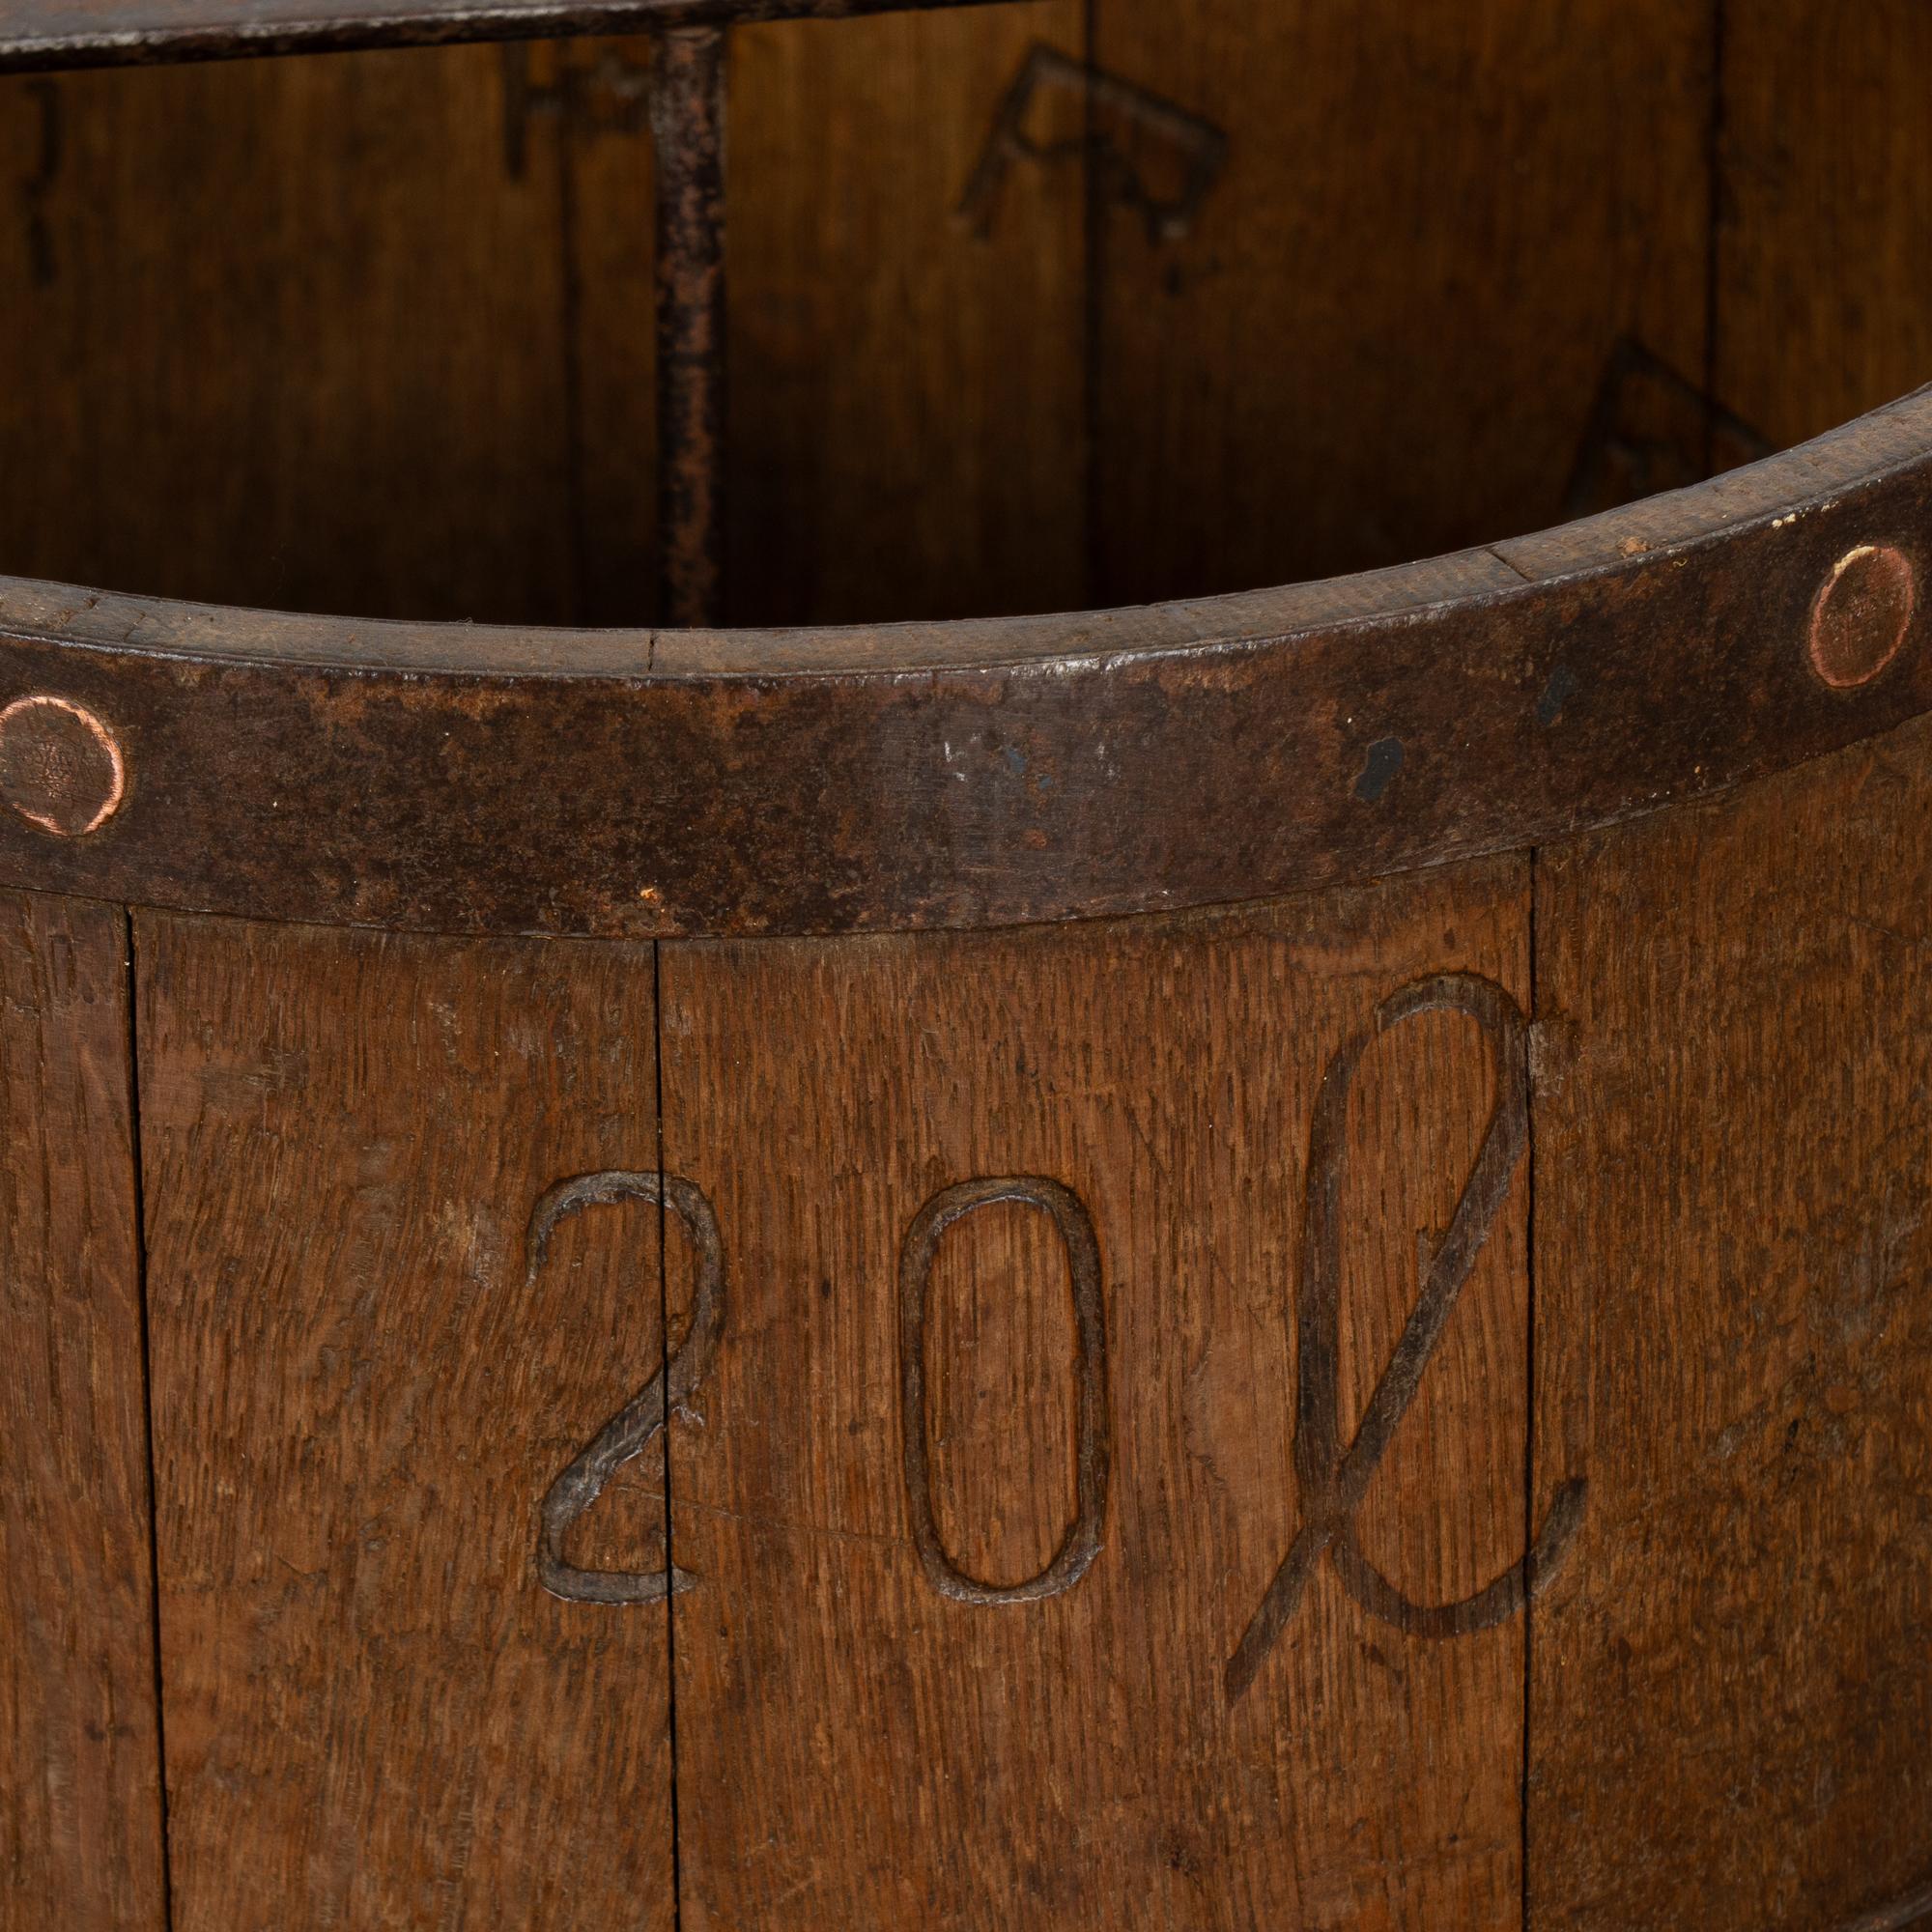 20th Century Oak Measuring Bucket with Metal Bands, Hungary circa 1920